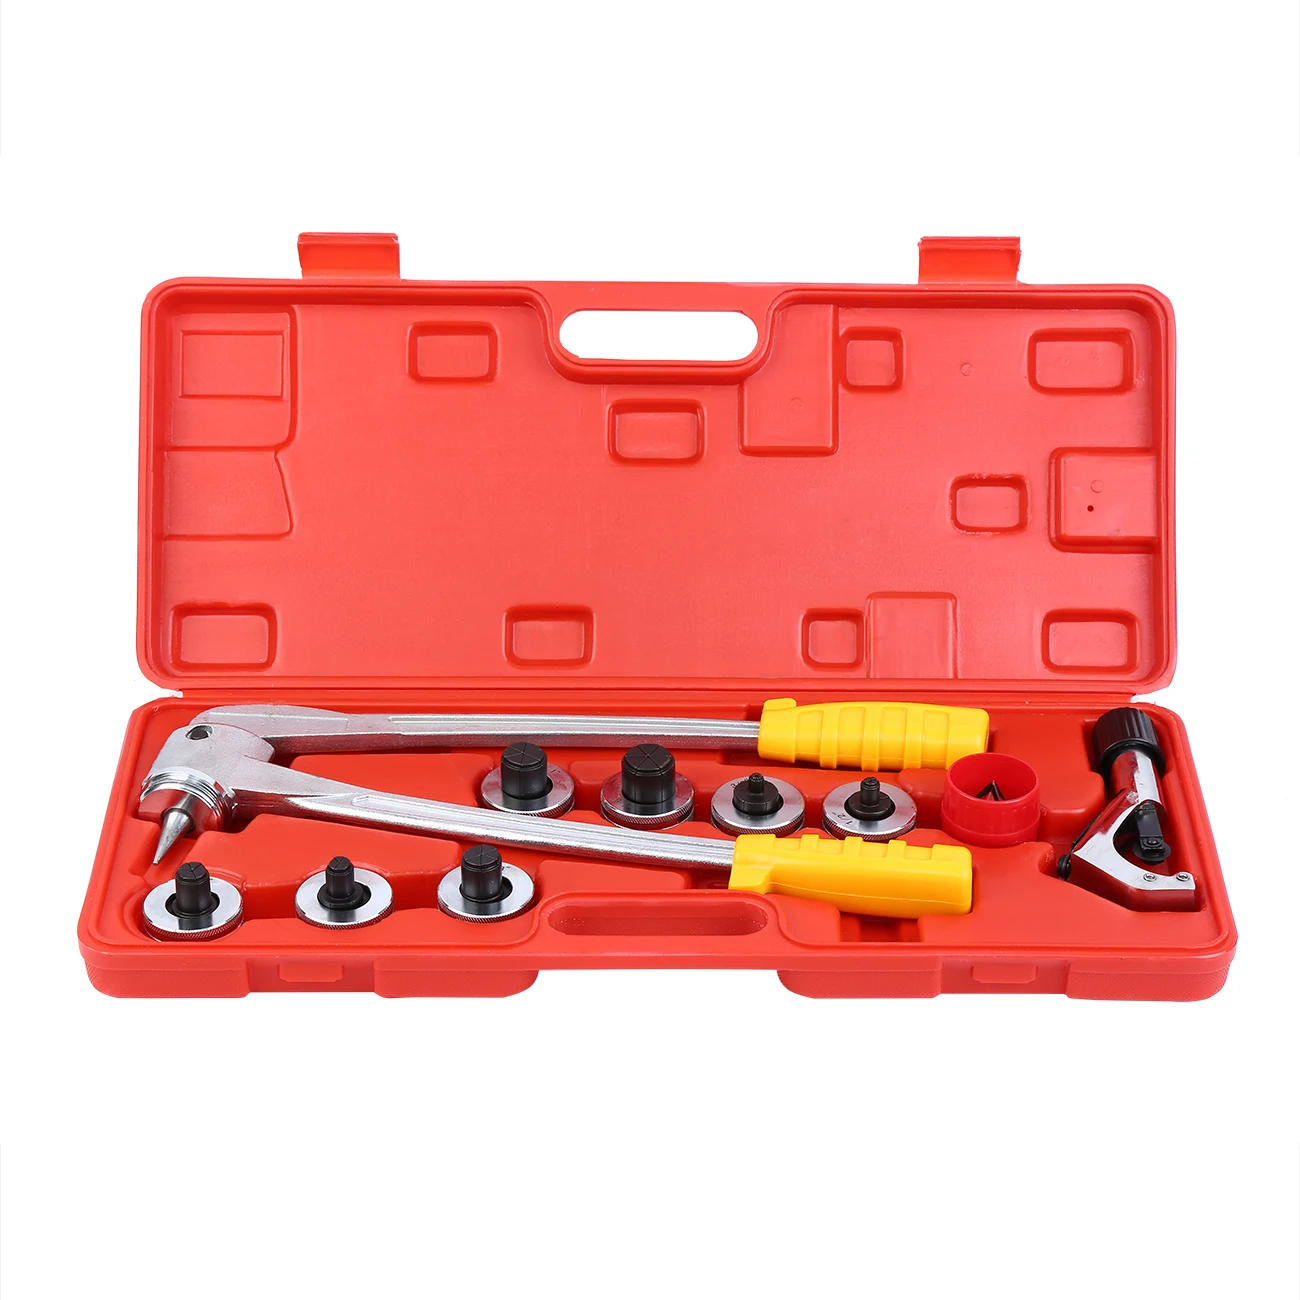 Yonntech Hydraulic Manual Tube Expander 7 Lever Expander Tools Kit HVAC For Copper Tube Flaring Tools 3/8